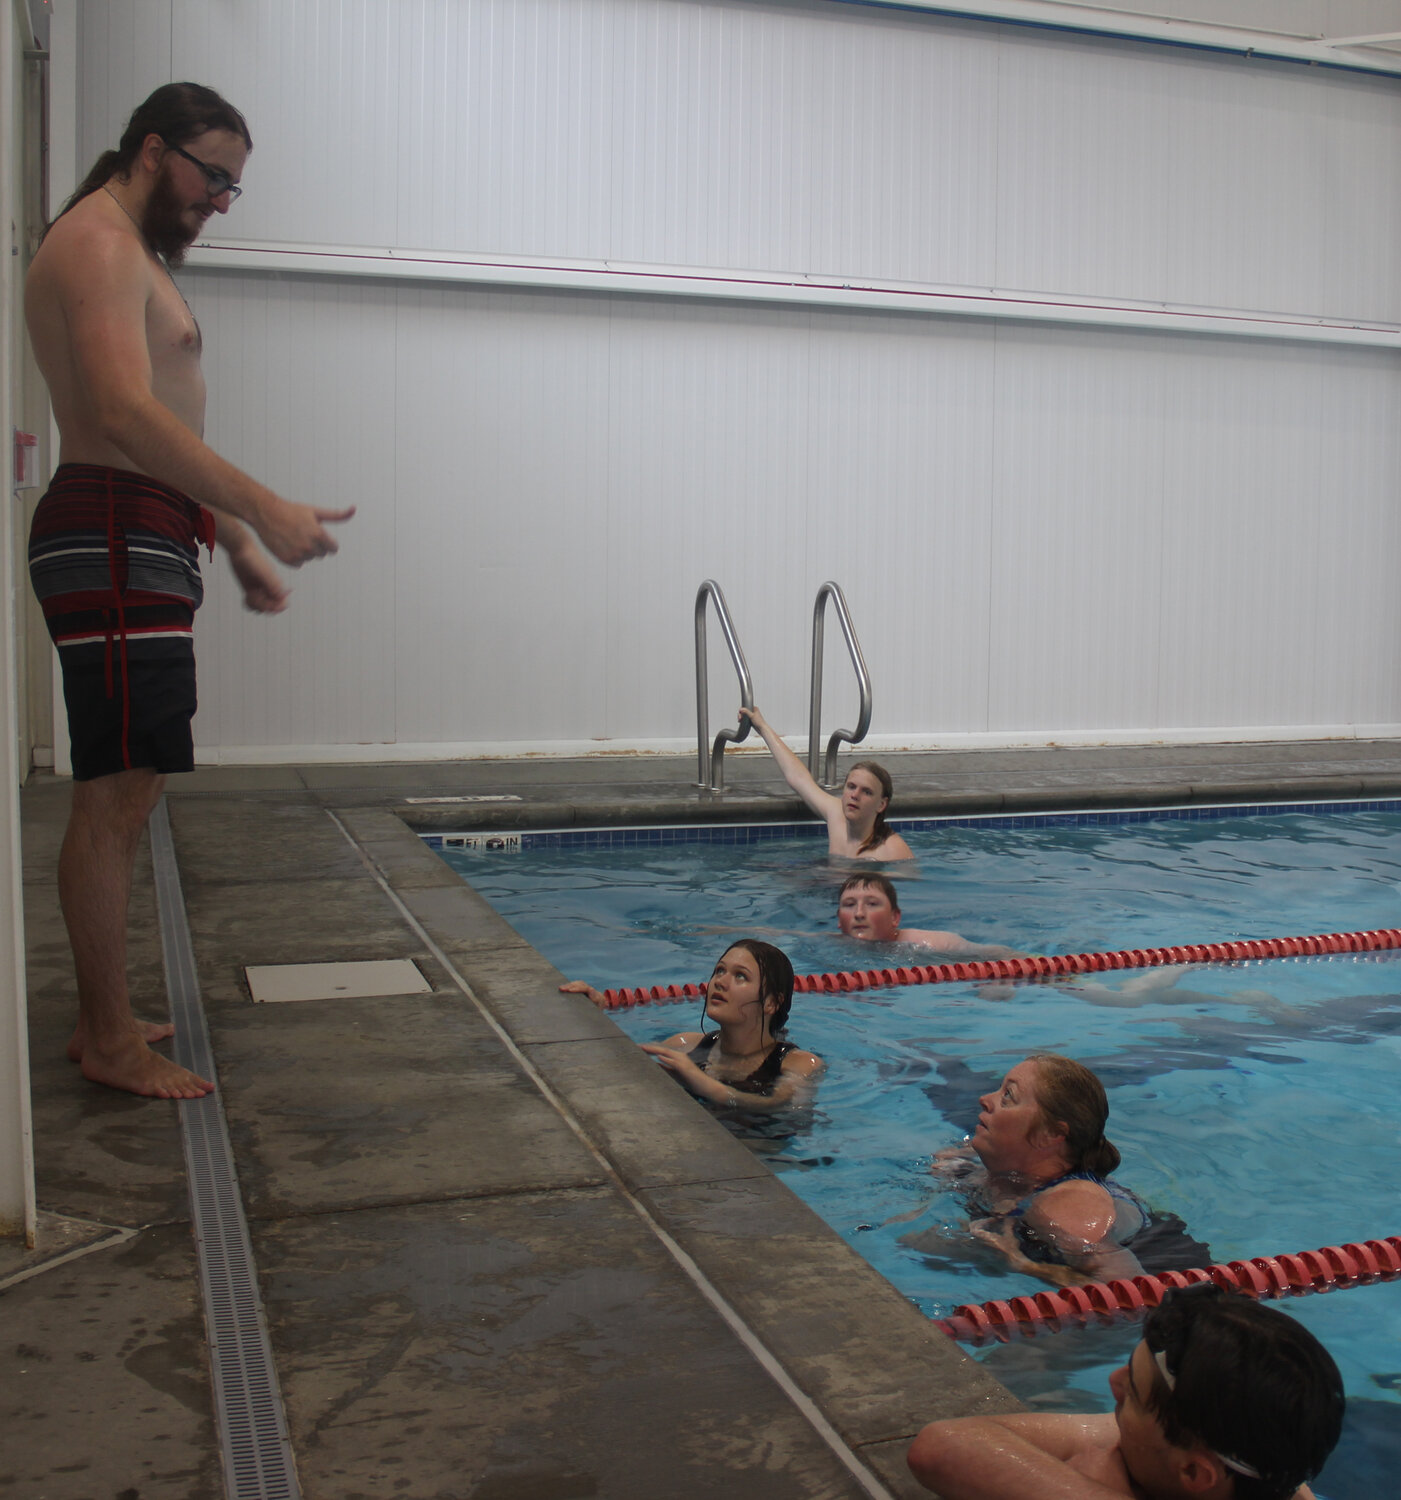 Cole McBride gives the five lifeguard candidates a thumbs up after they finished swimming their warm-up laps on May 19.